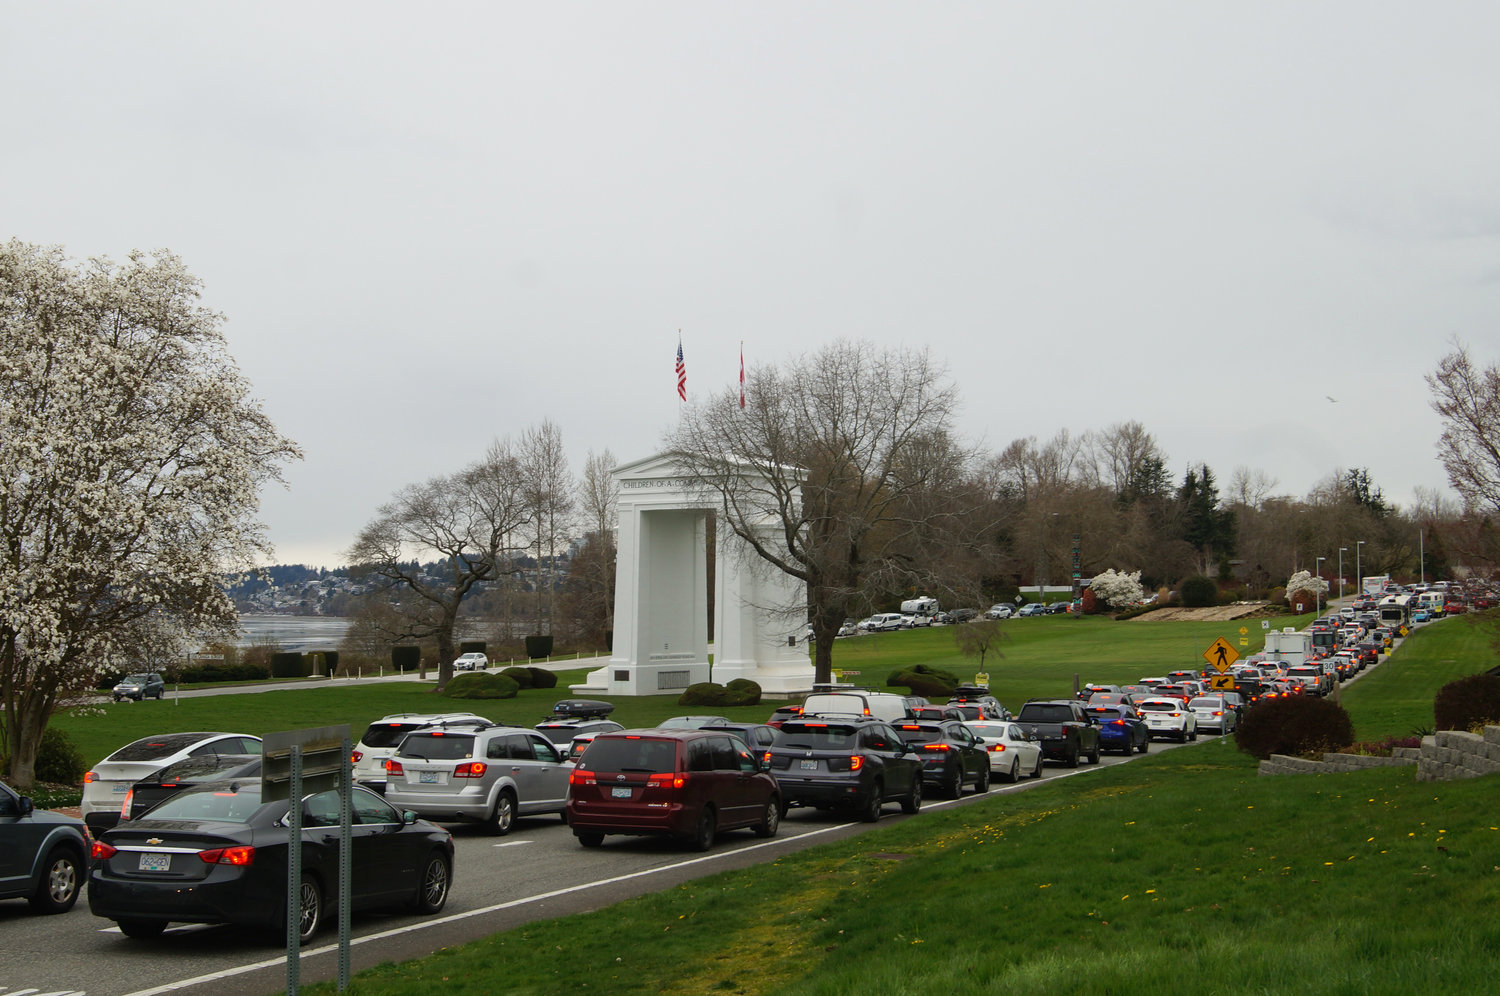 Travelers lined up to enter Canada on April 1, the day the Canadian government dropped its antigen testing requirement for fully vaccinated travelers. Over 7,400 vehicles crossed both ways through the Peace Arch border crossing on April 1, according to data from Cascade Gateway.